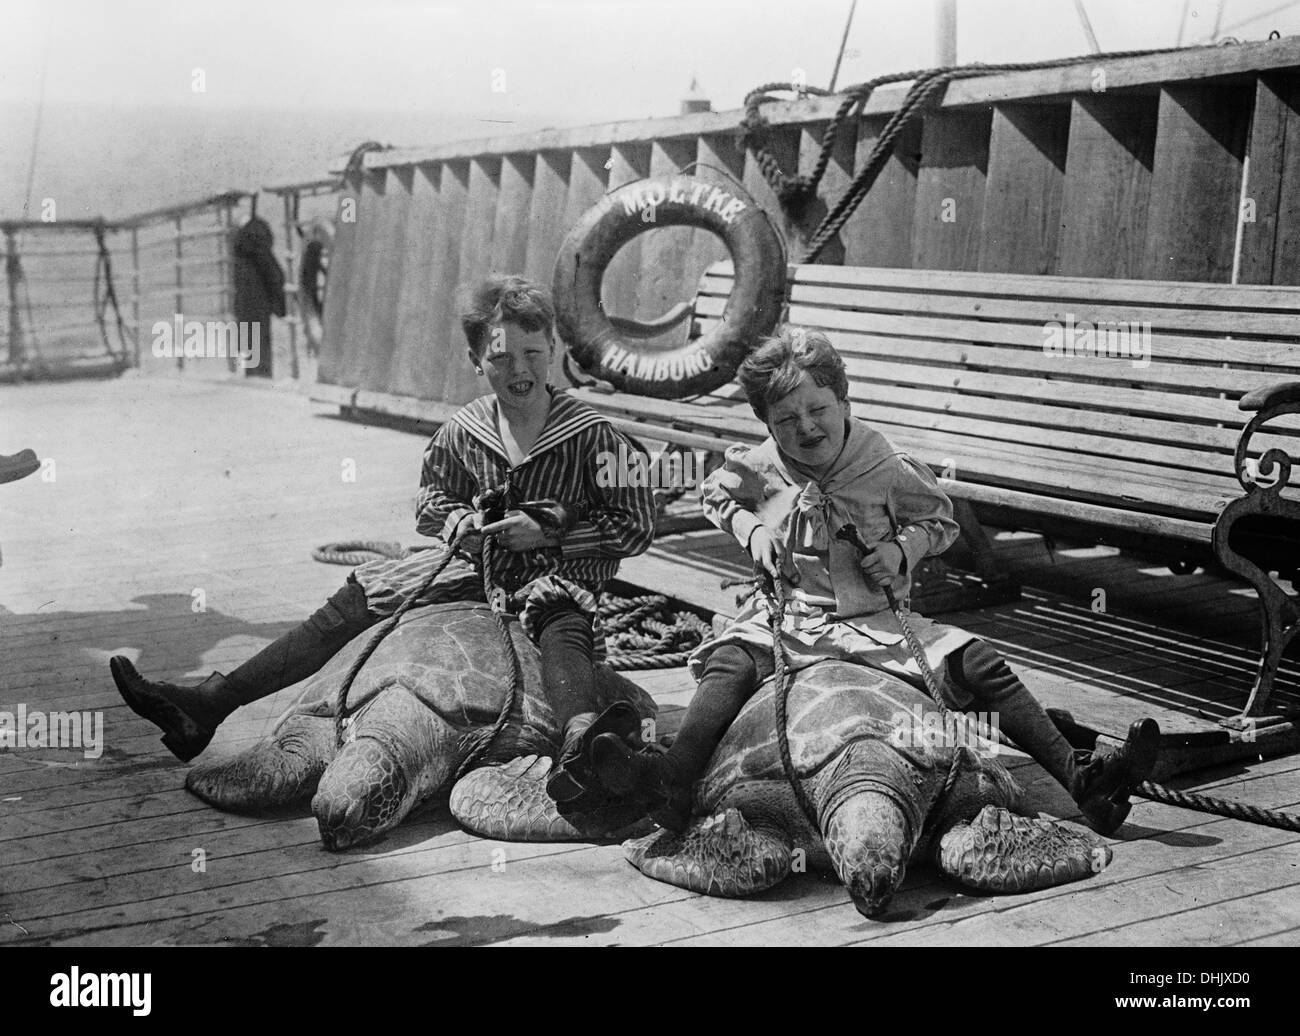 View of the sun deck with two children riding green sea turtles (Chelonia mydas) on the ocean liner 'Moltke' of Hapag Hamburg, Blohm und Voss Hamburg, shipyard 1901, photograph taken around 1910. The image was taken by the German photographer Oswald Lübeck, one of the earliest representatives of travel photography and ship photography aboard passenger ships. Photo: Deutsche Fotothek/Oswald Lübeck Stock Photo